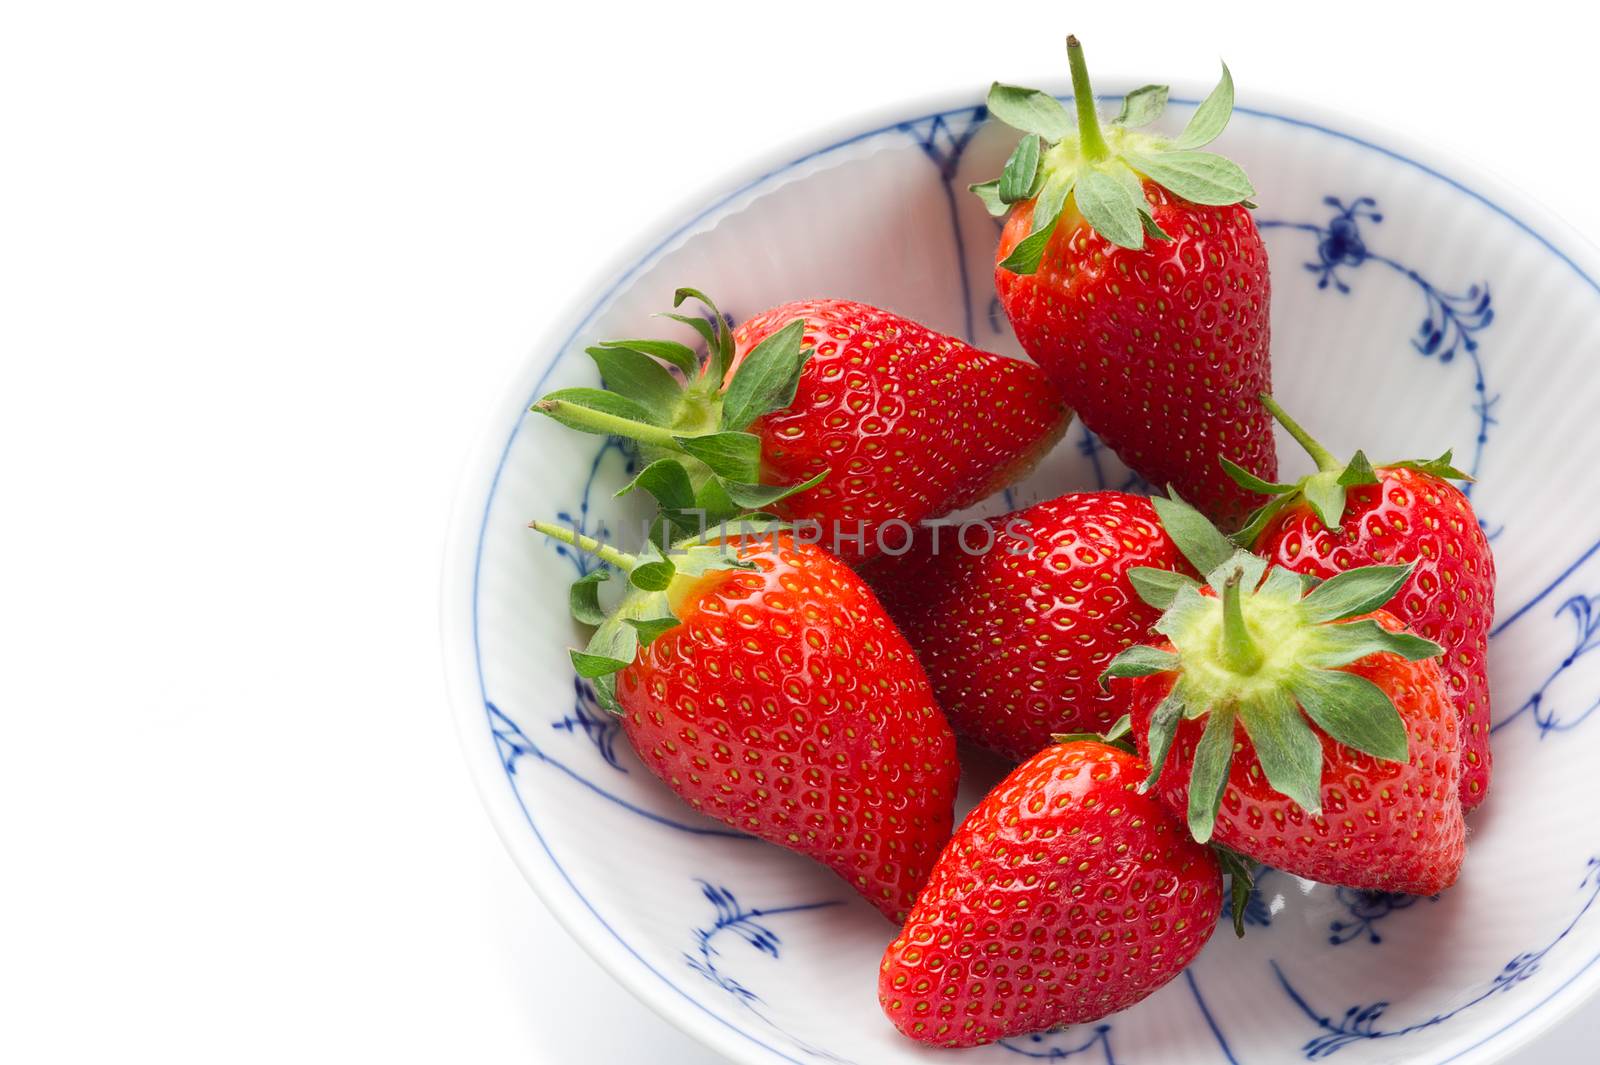 Fresh ripe strawberries, source of antioxidants and vitamin C, in a white bowl with blue decorative pattern, to be served as a healthy snack or dessert, high-angle close-up with copy space on white